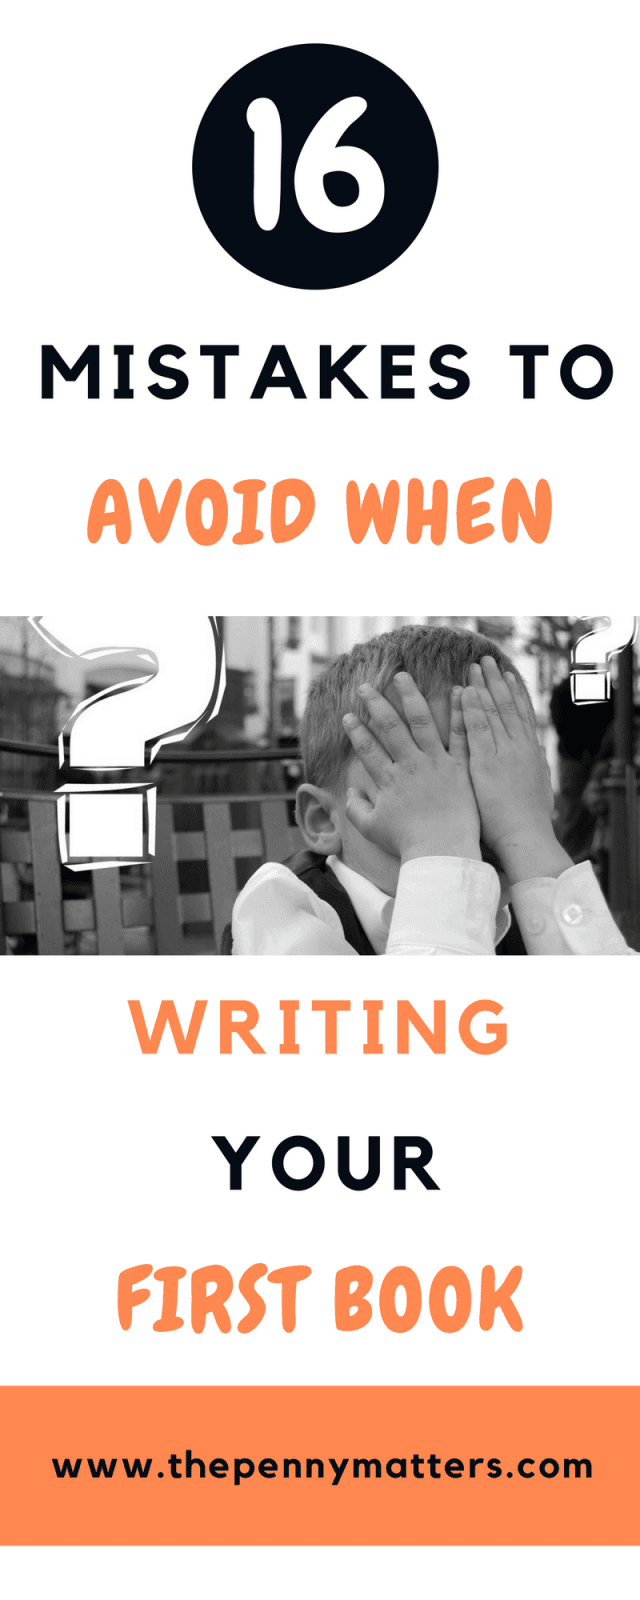 16 mistakes to avoid when writing your first book